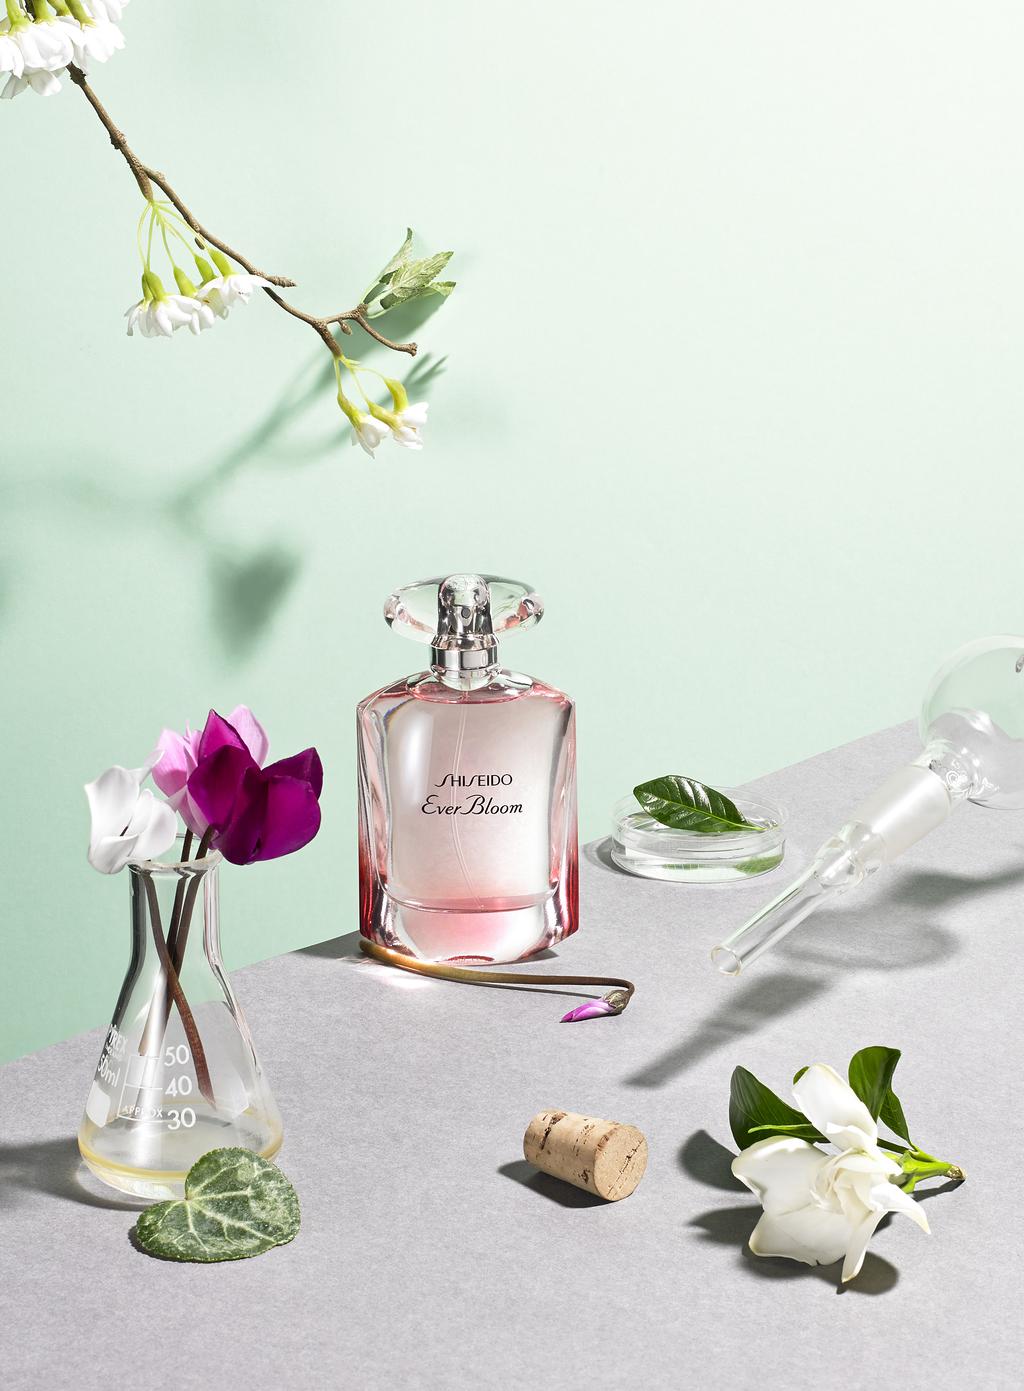 SPHERES OF SCENT Ever Bloom, 55 for 50ml, Shiseido Perfume shopping can feel a little like a blind date.